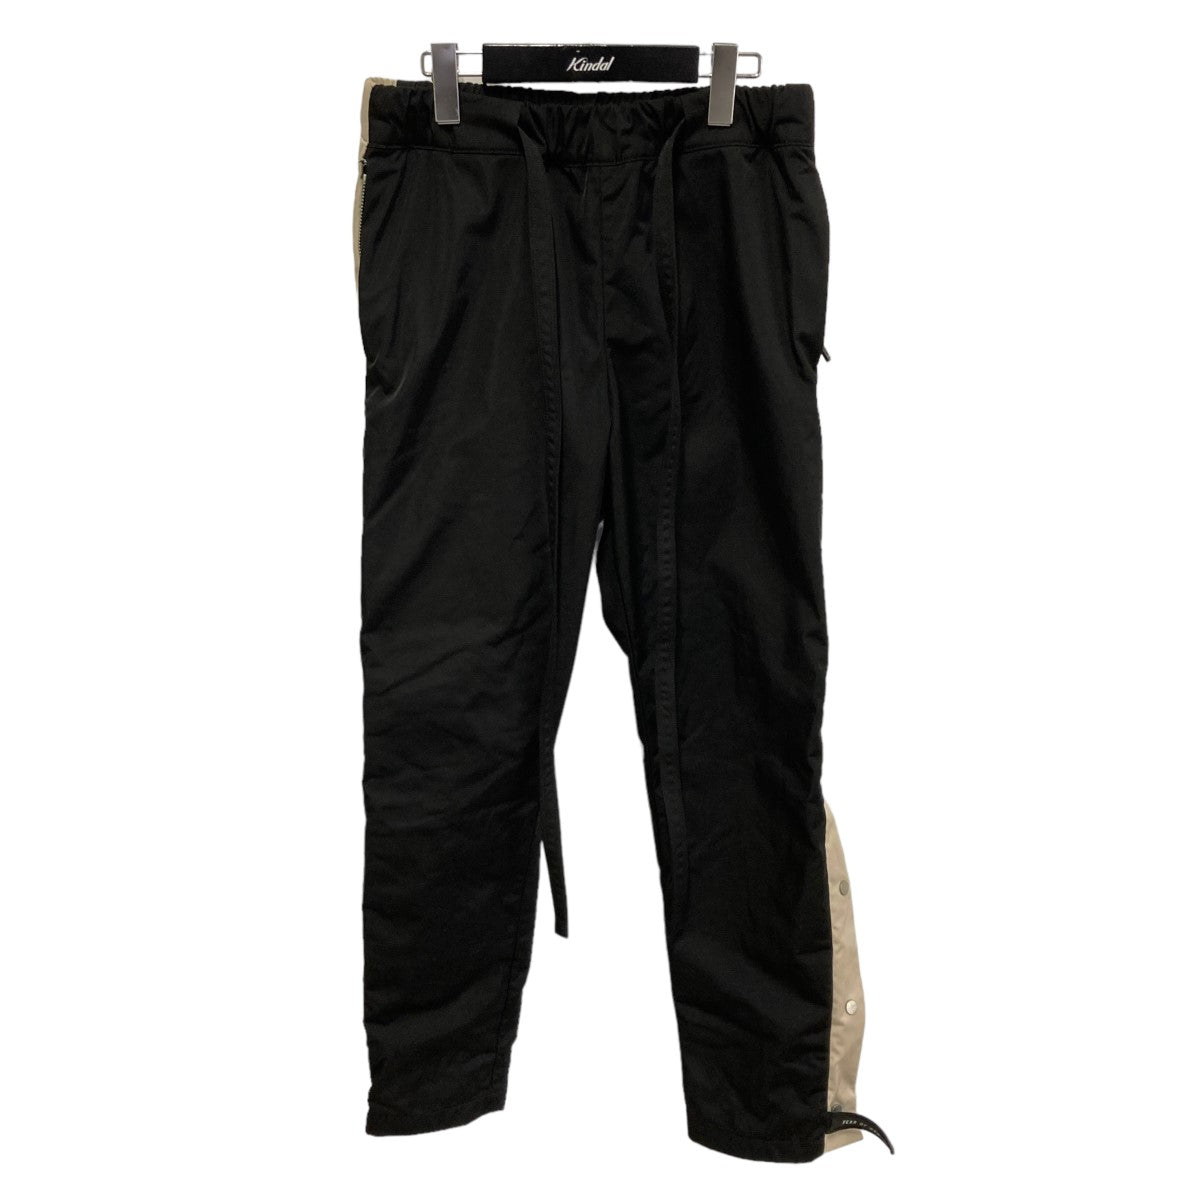 FEAR OF GOD(フィアオブゴッド) STRIPED BAGGY TEARAWAY TROUSERS 6H19 